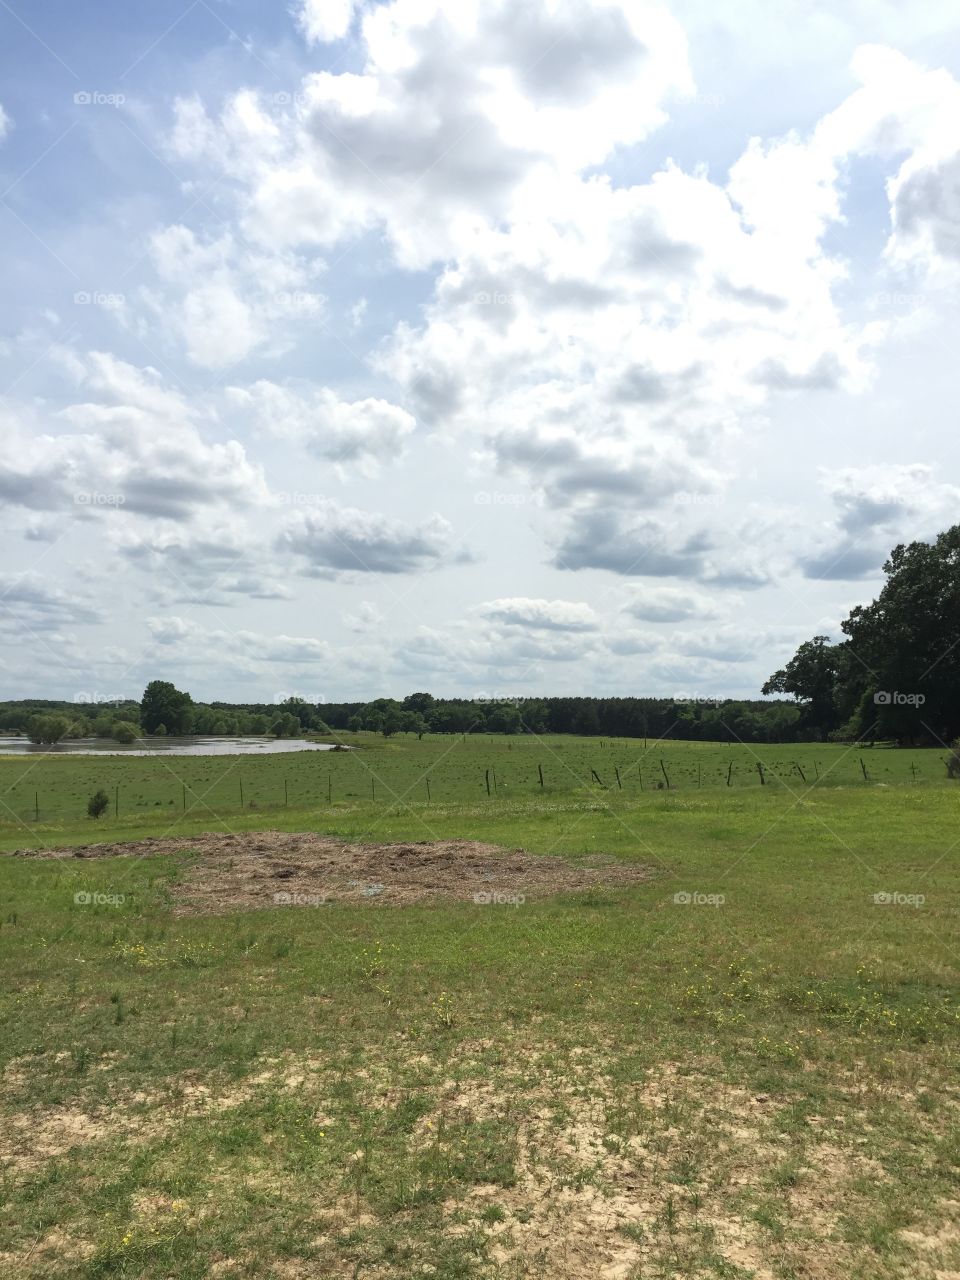 Landscape of cattle farm in Mississippi 